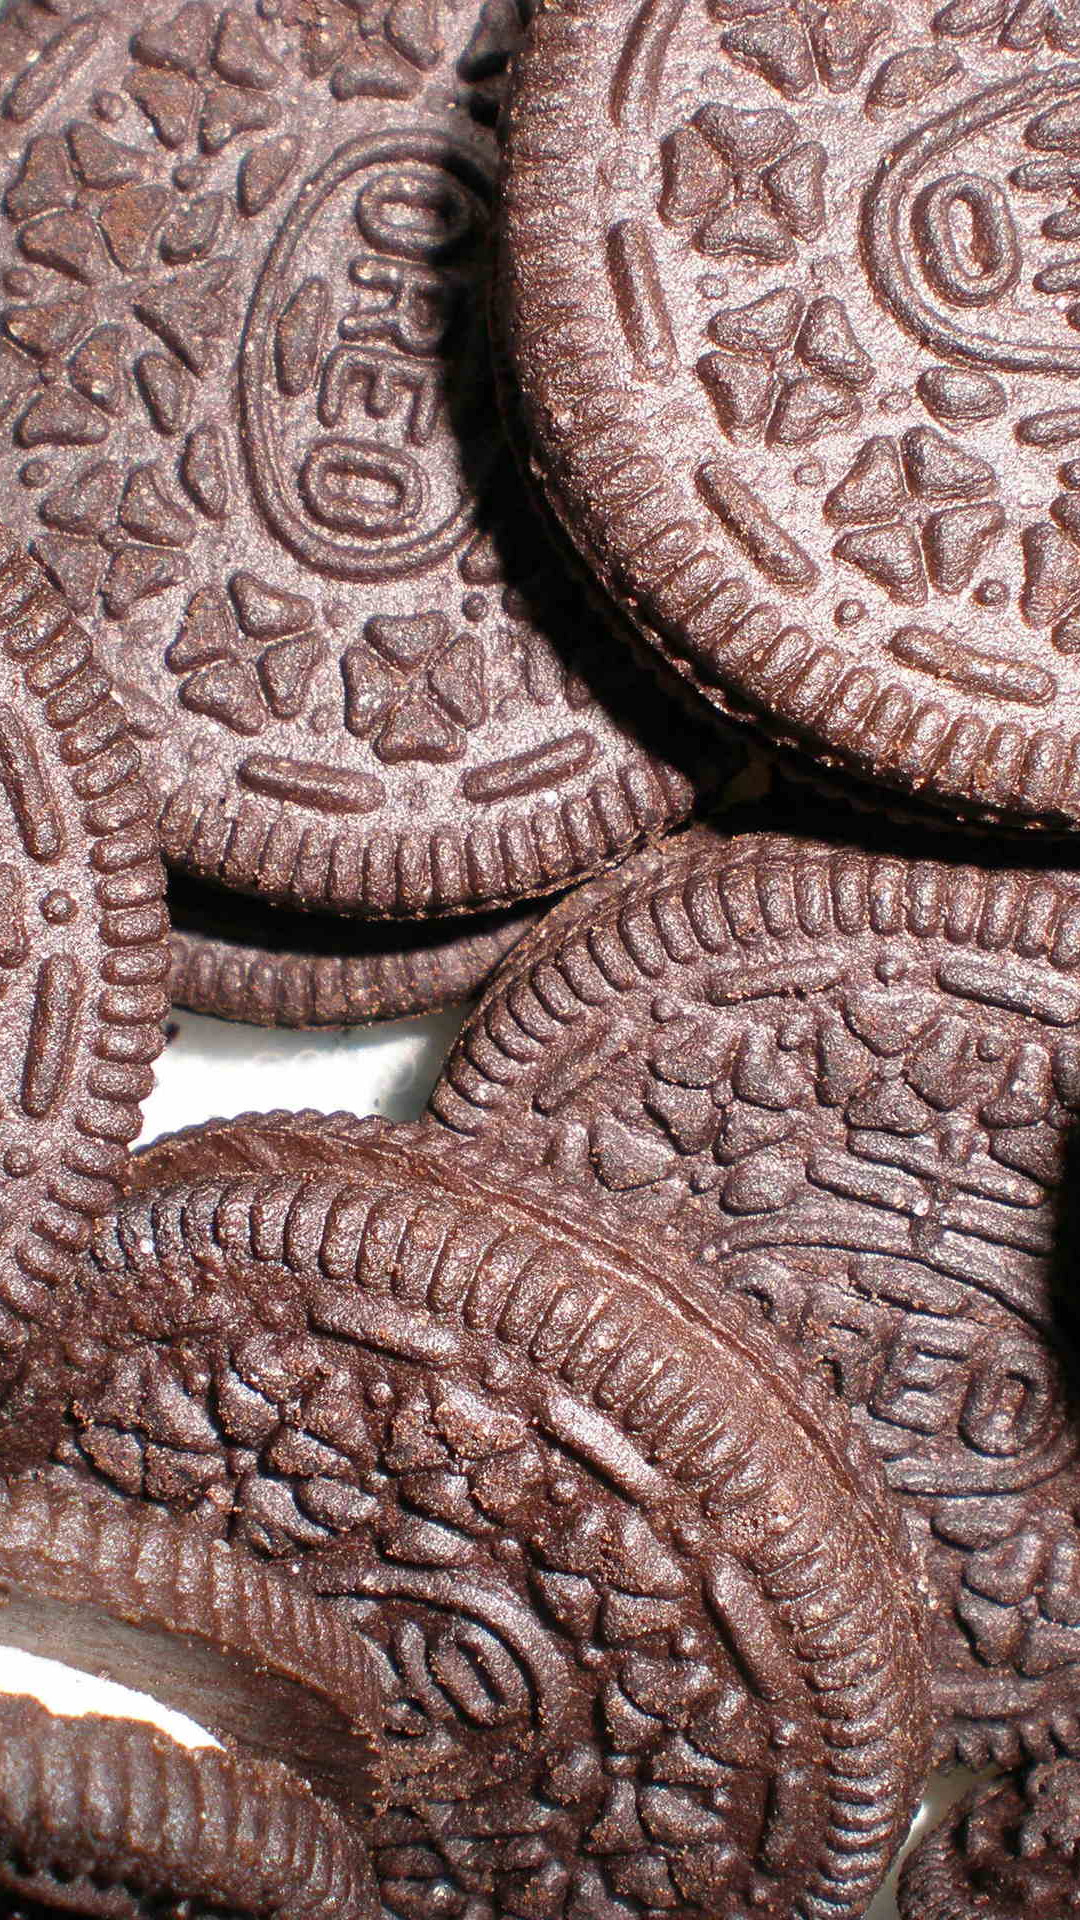 Oreo Cookies: The best-selling cookie of the 20th century. 1080x1920 Full HD Wallpaper.